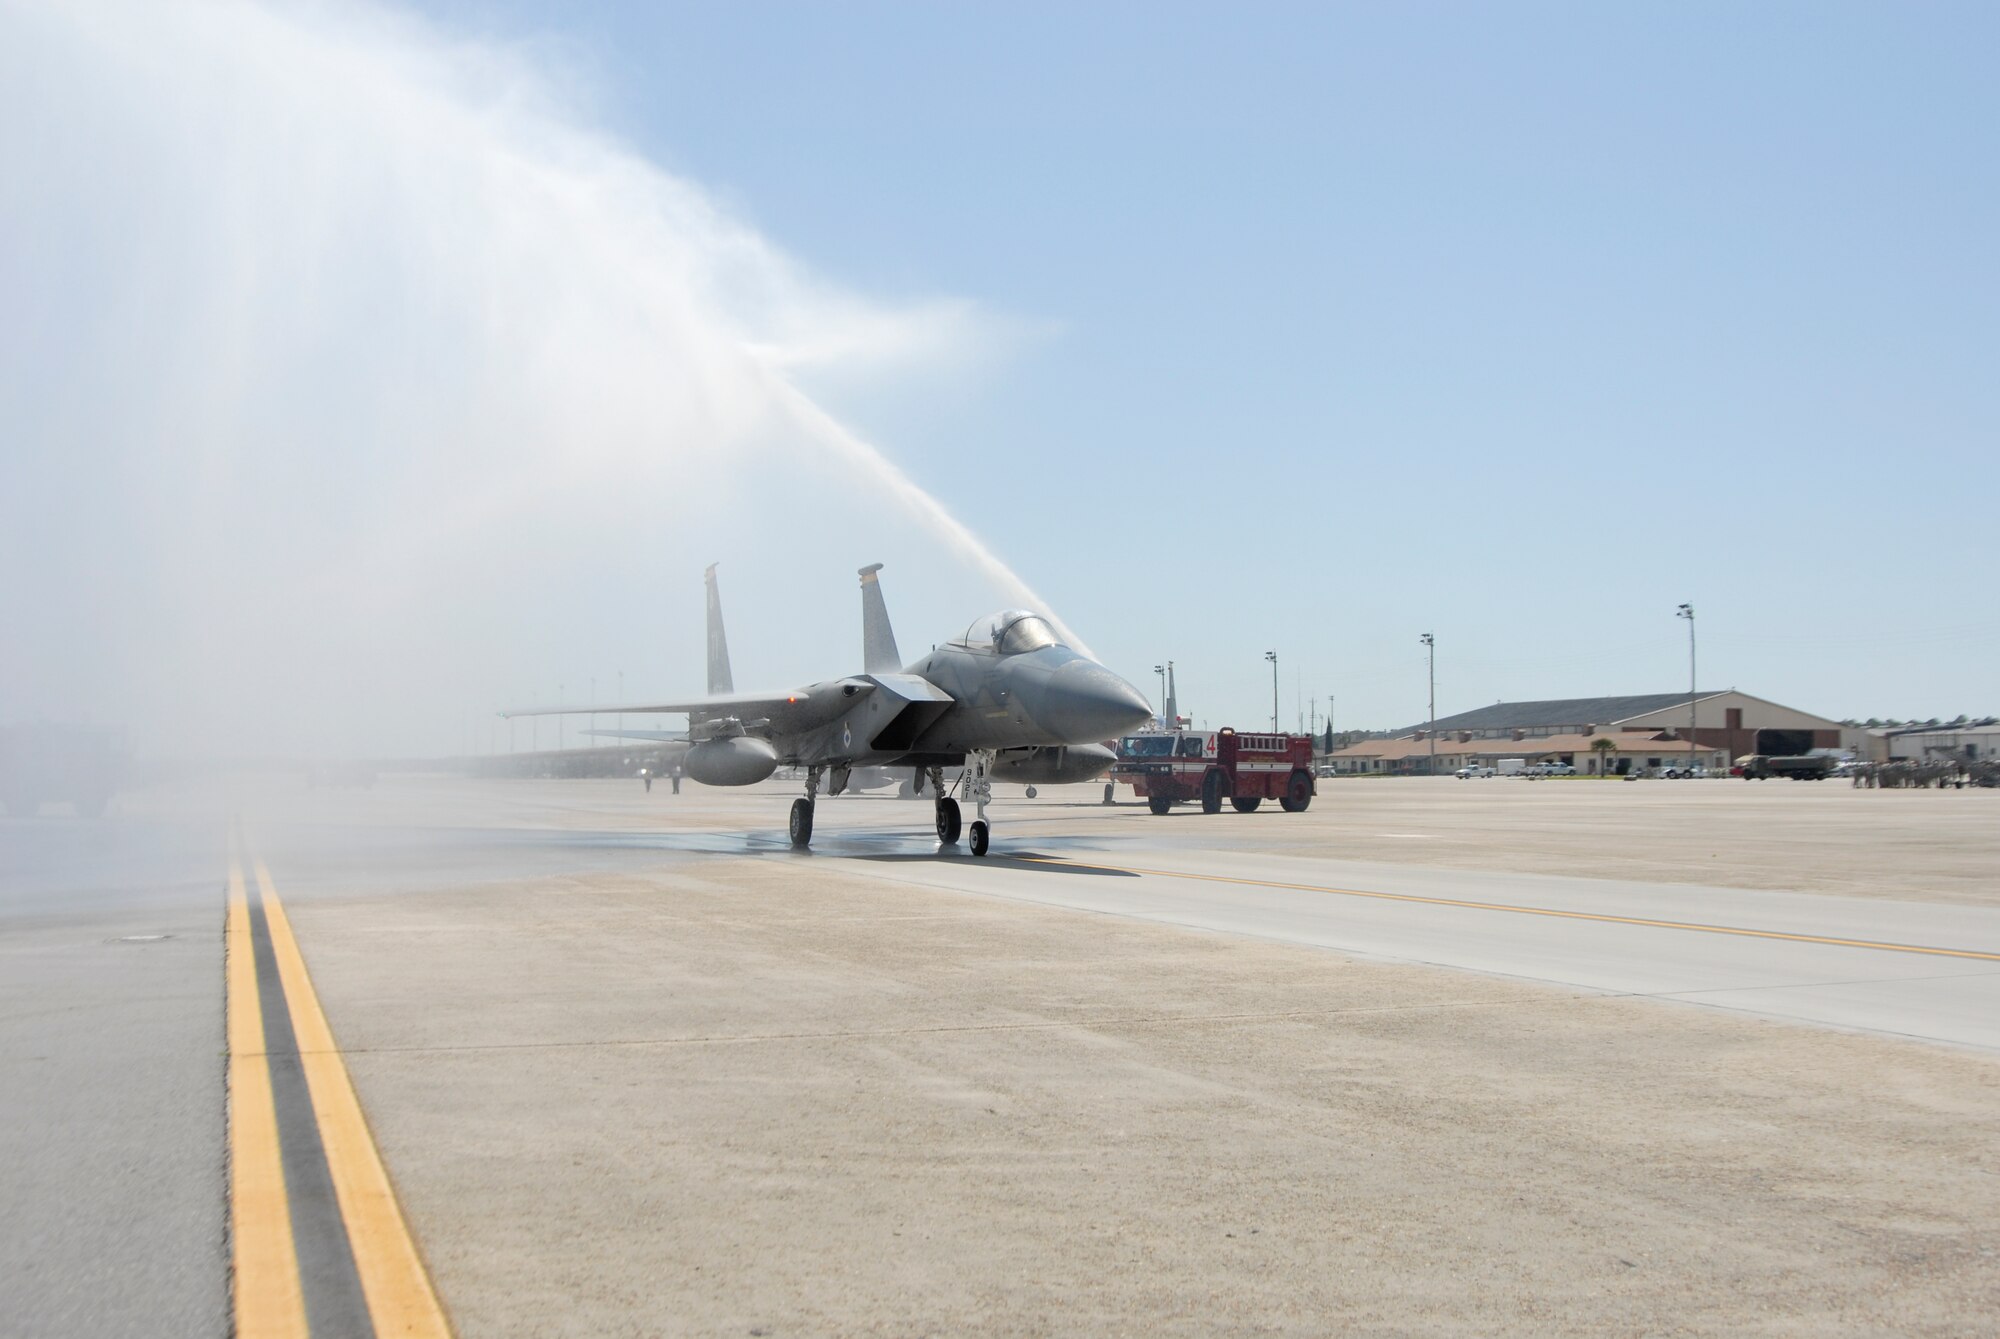 An F-15 of the 2nd Fighter Squadron’s final mission taxis on the runway having completed the squadron's final at Tyndall Air Force base.  (Courtesy photo)